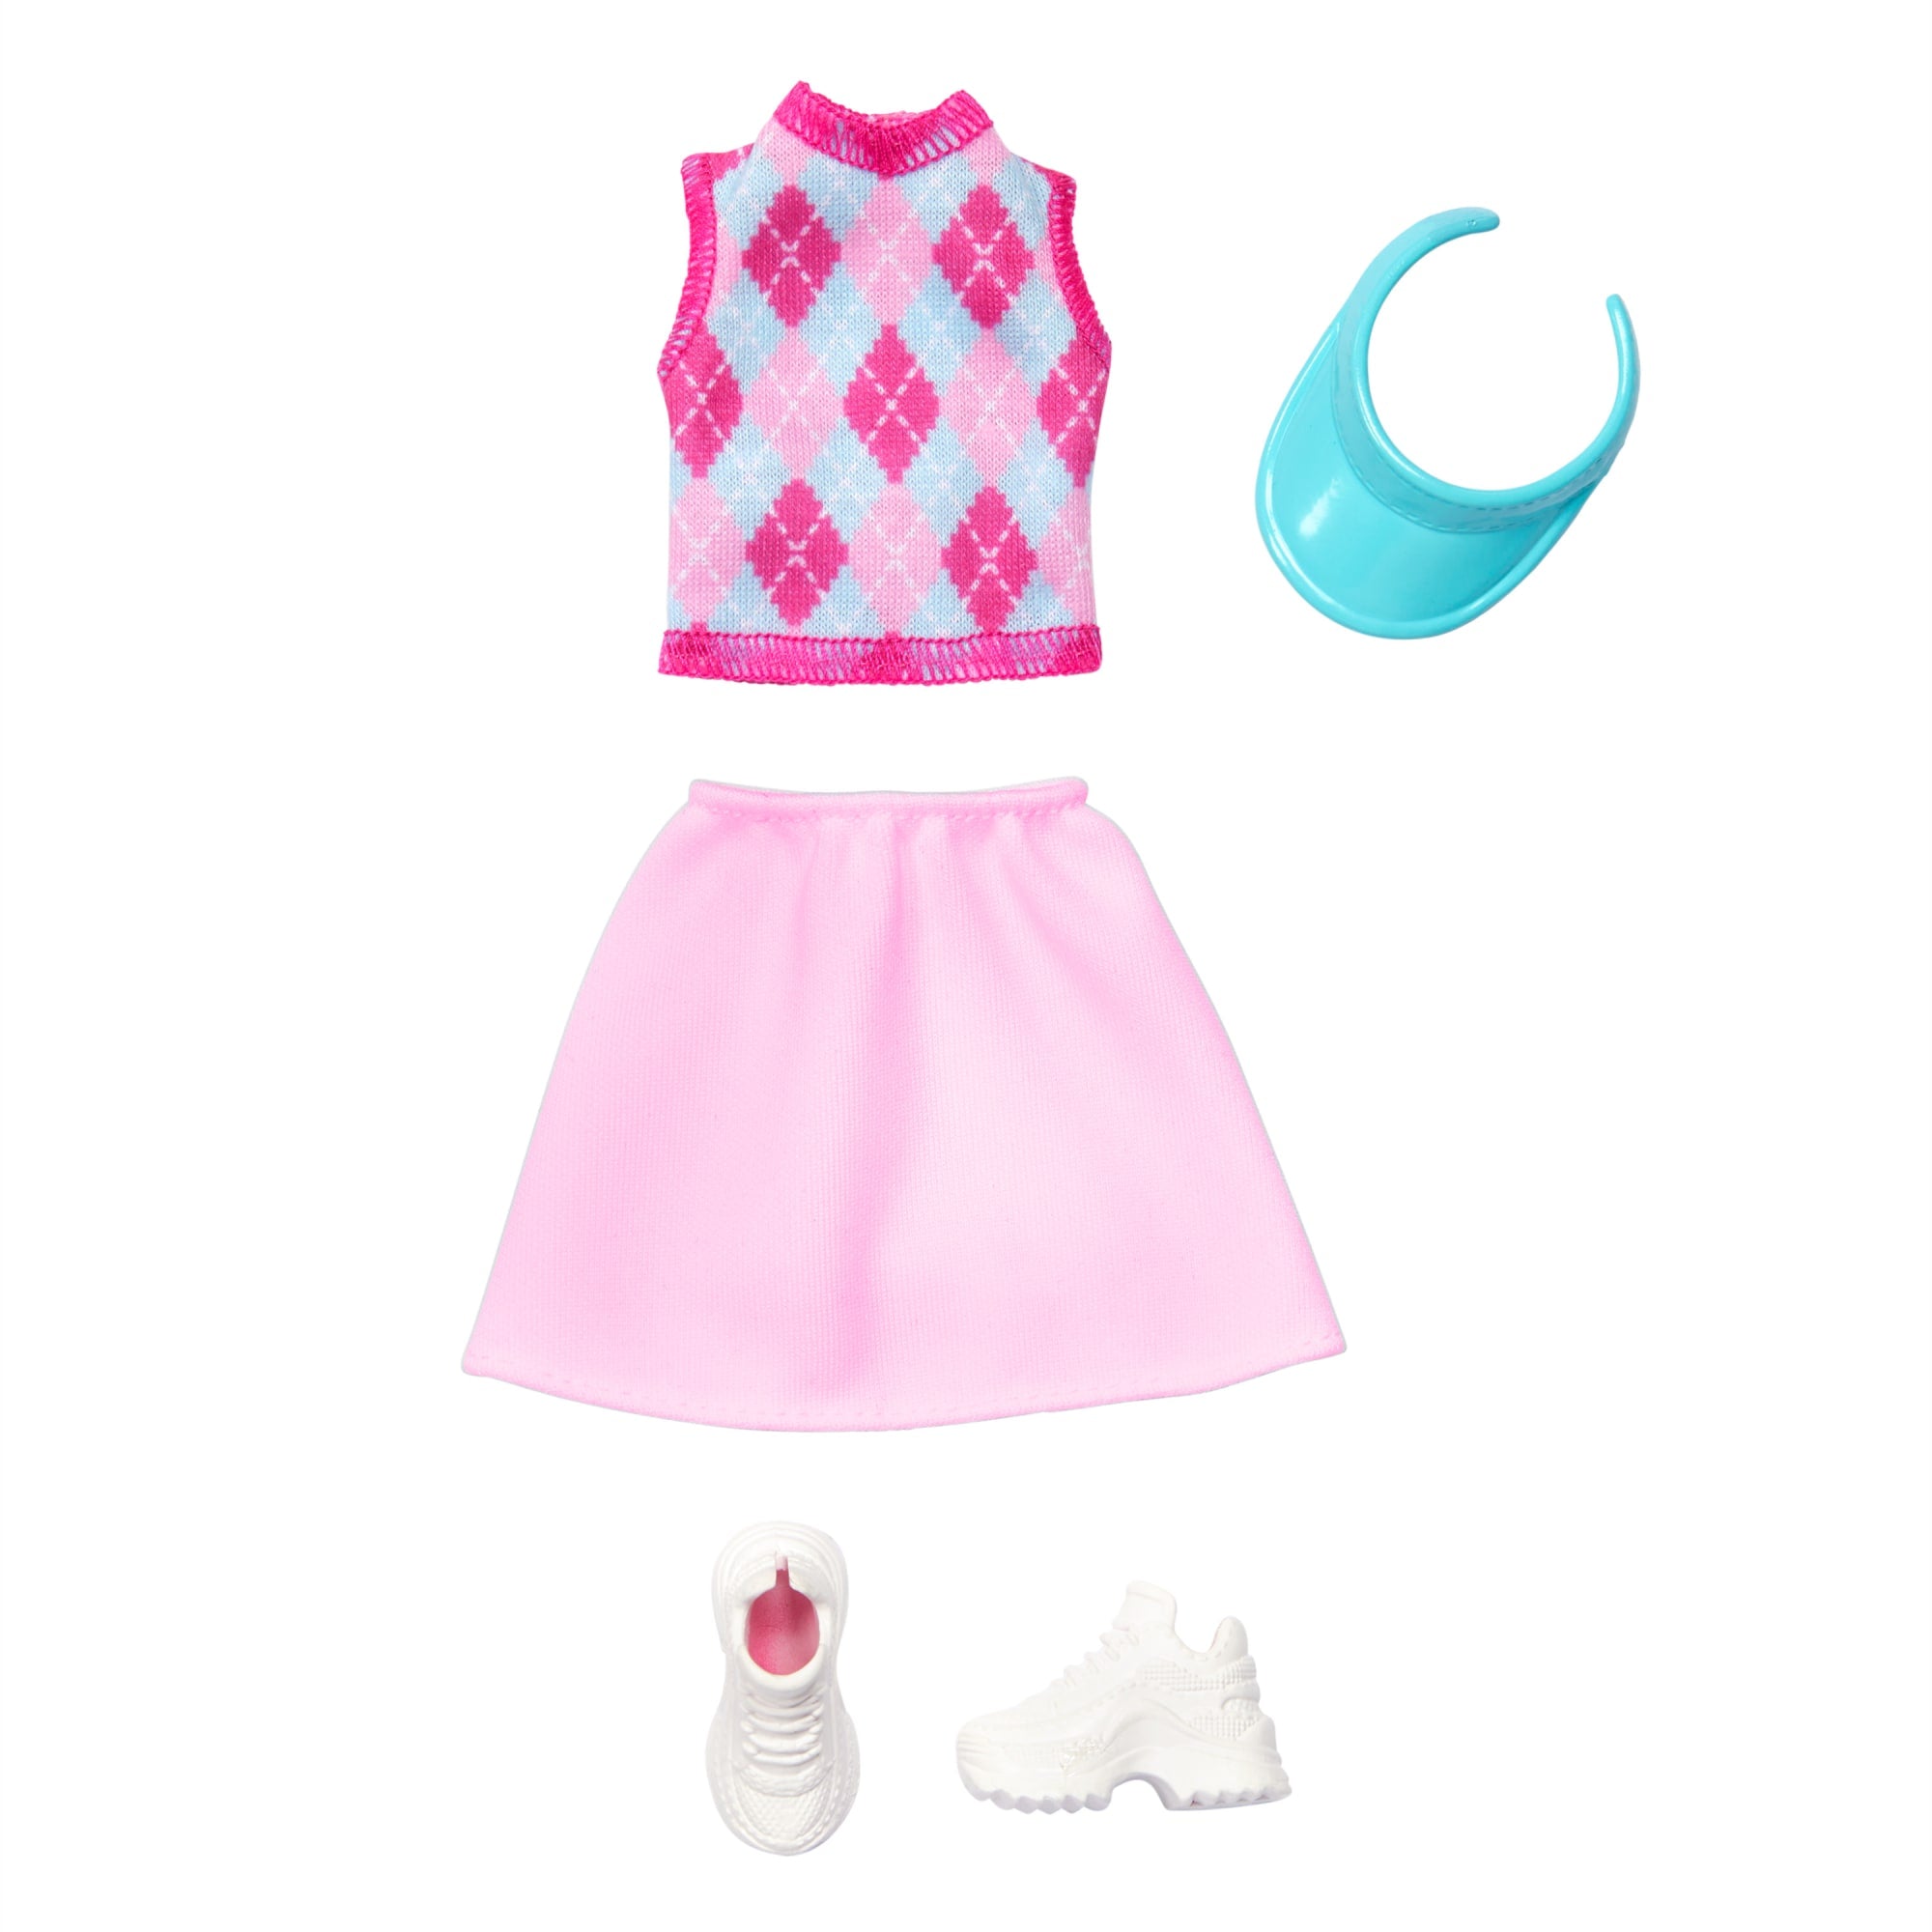 Barbie® Fashions and Accessories | Mattel